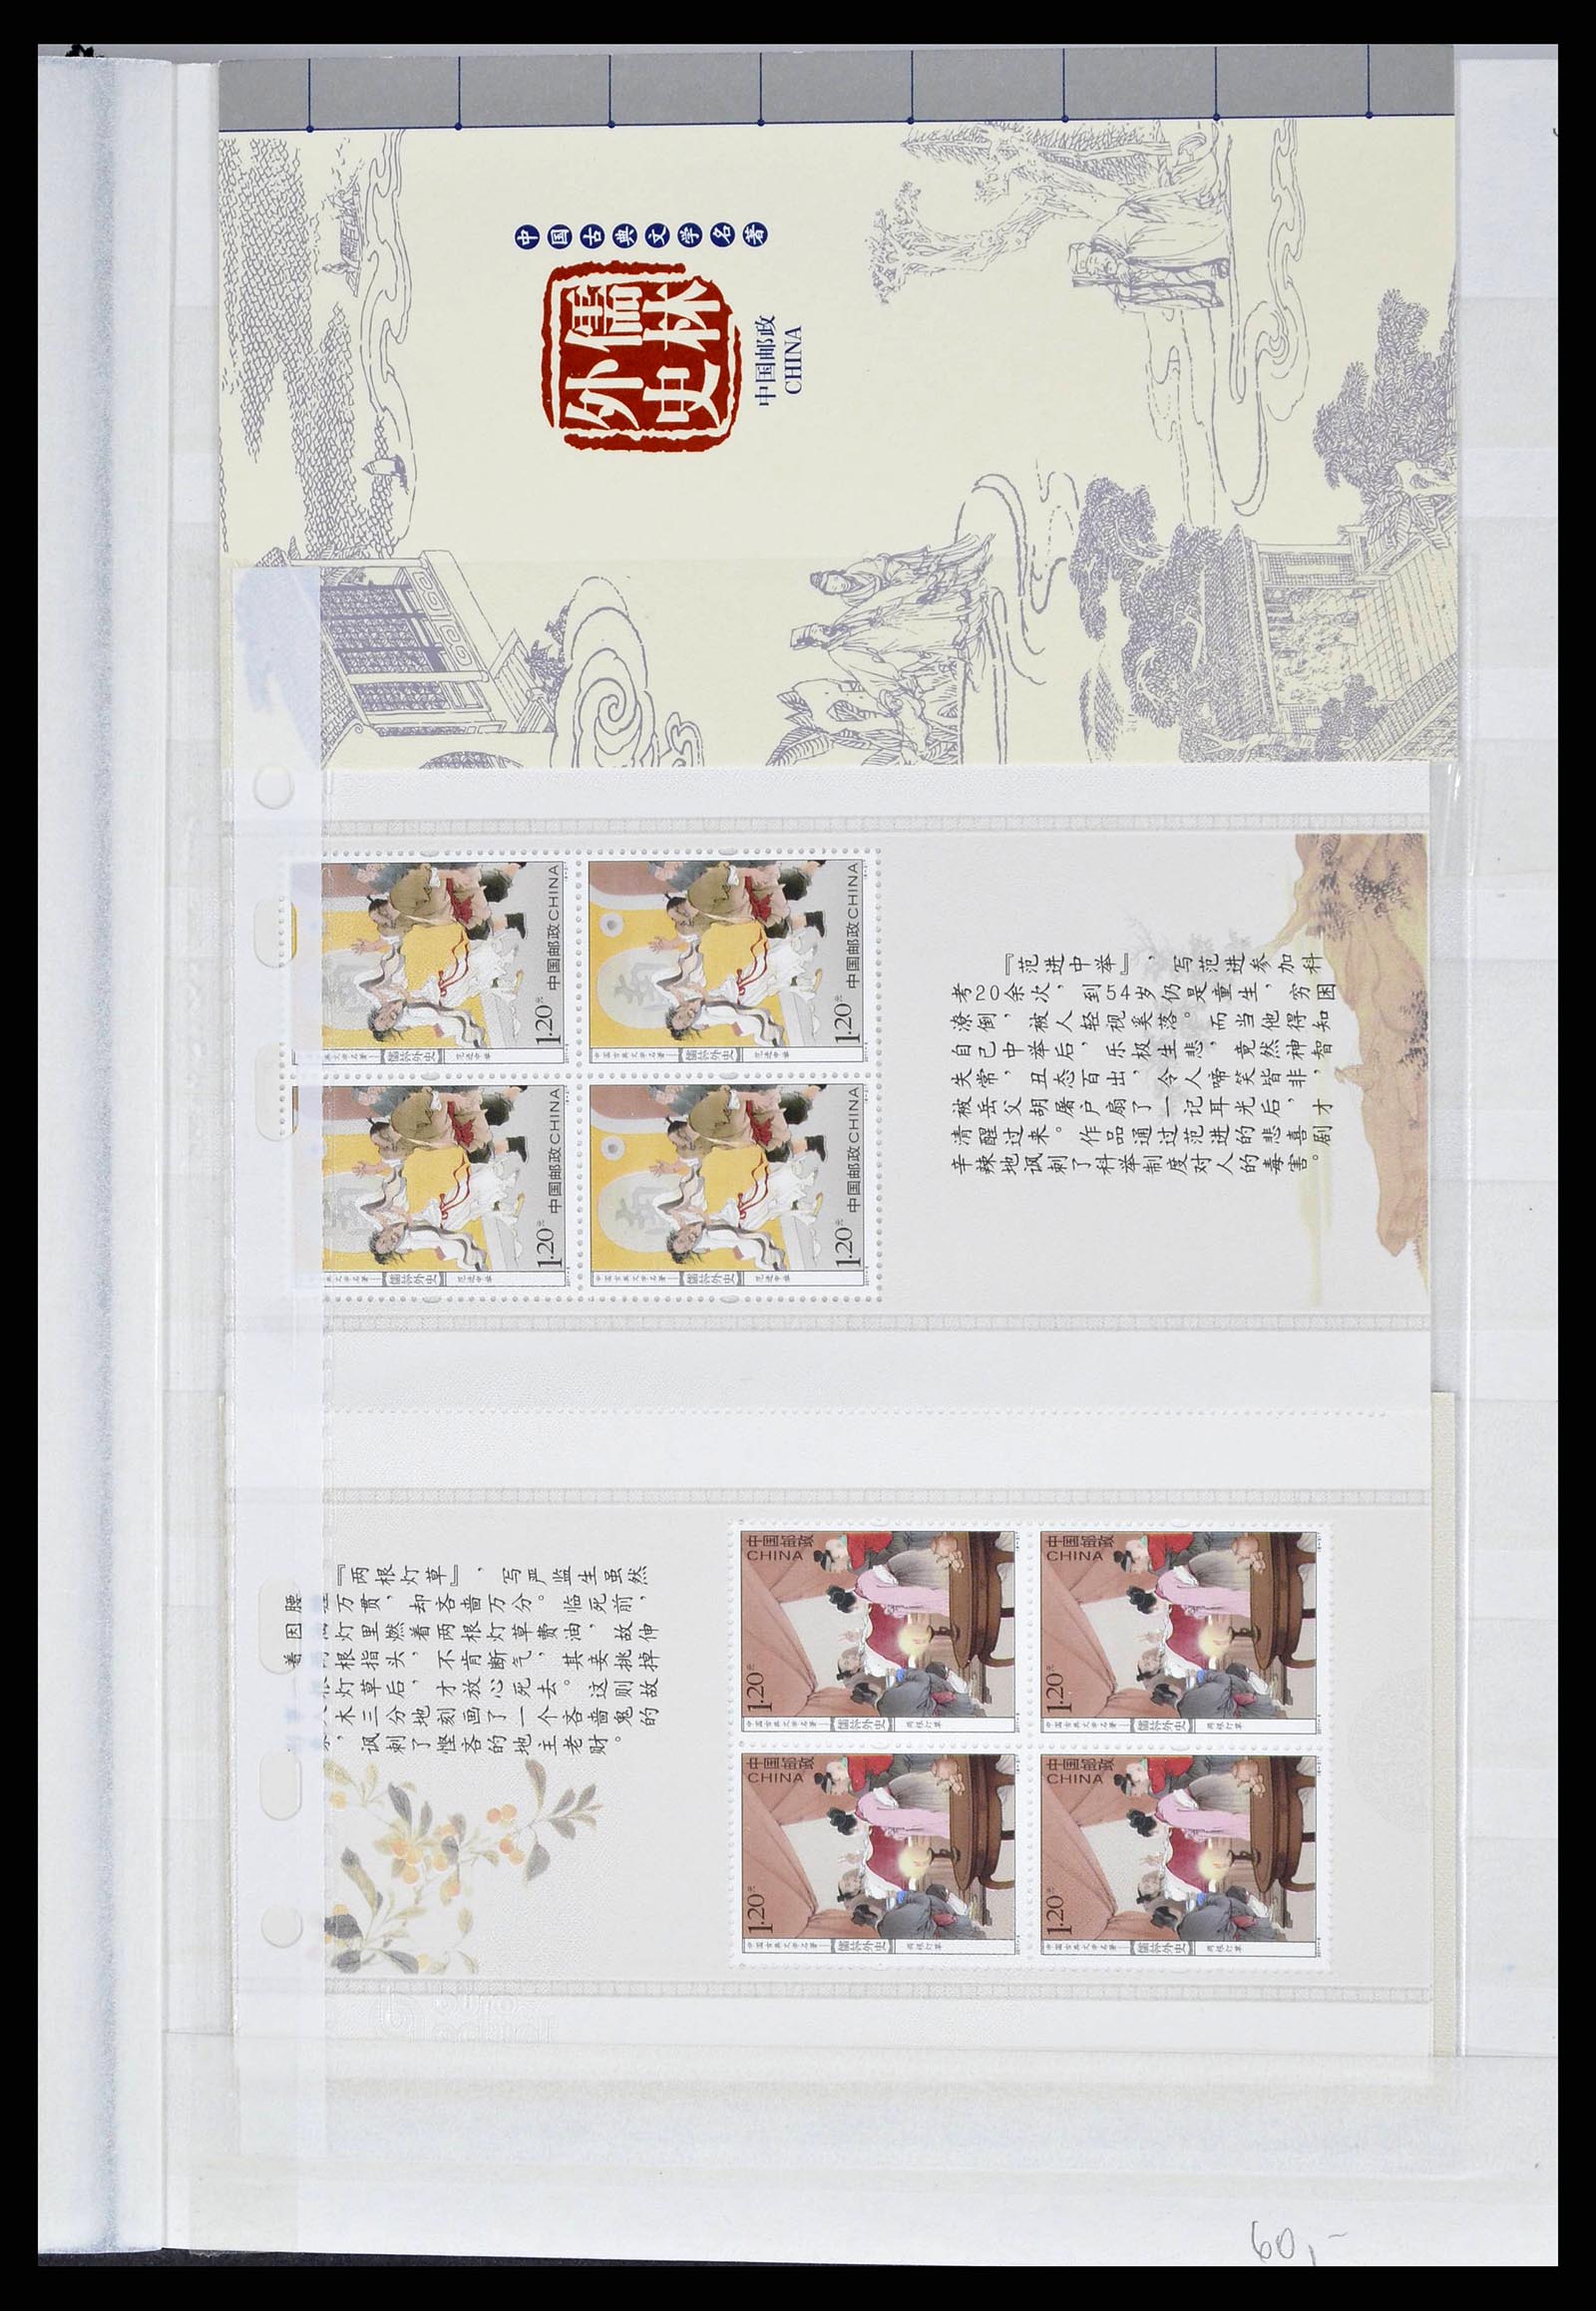 38536 0009 - Stamp collection 38536 China 2011.